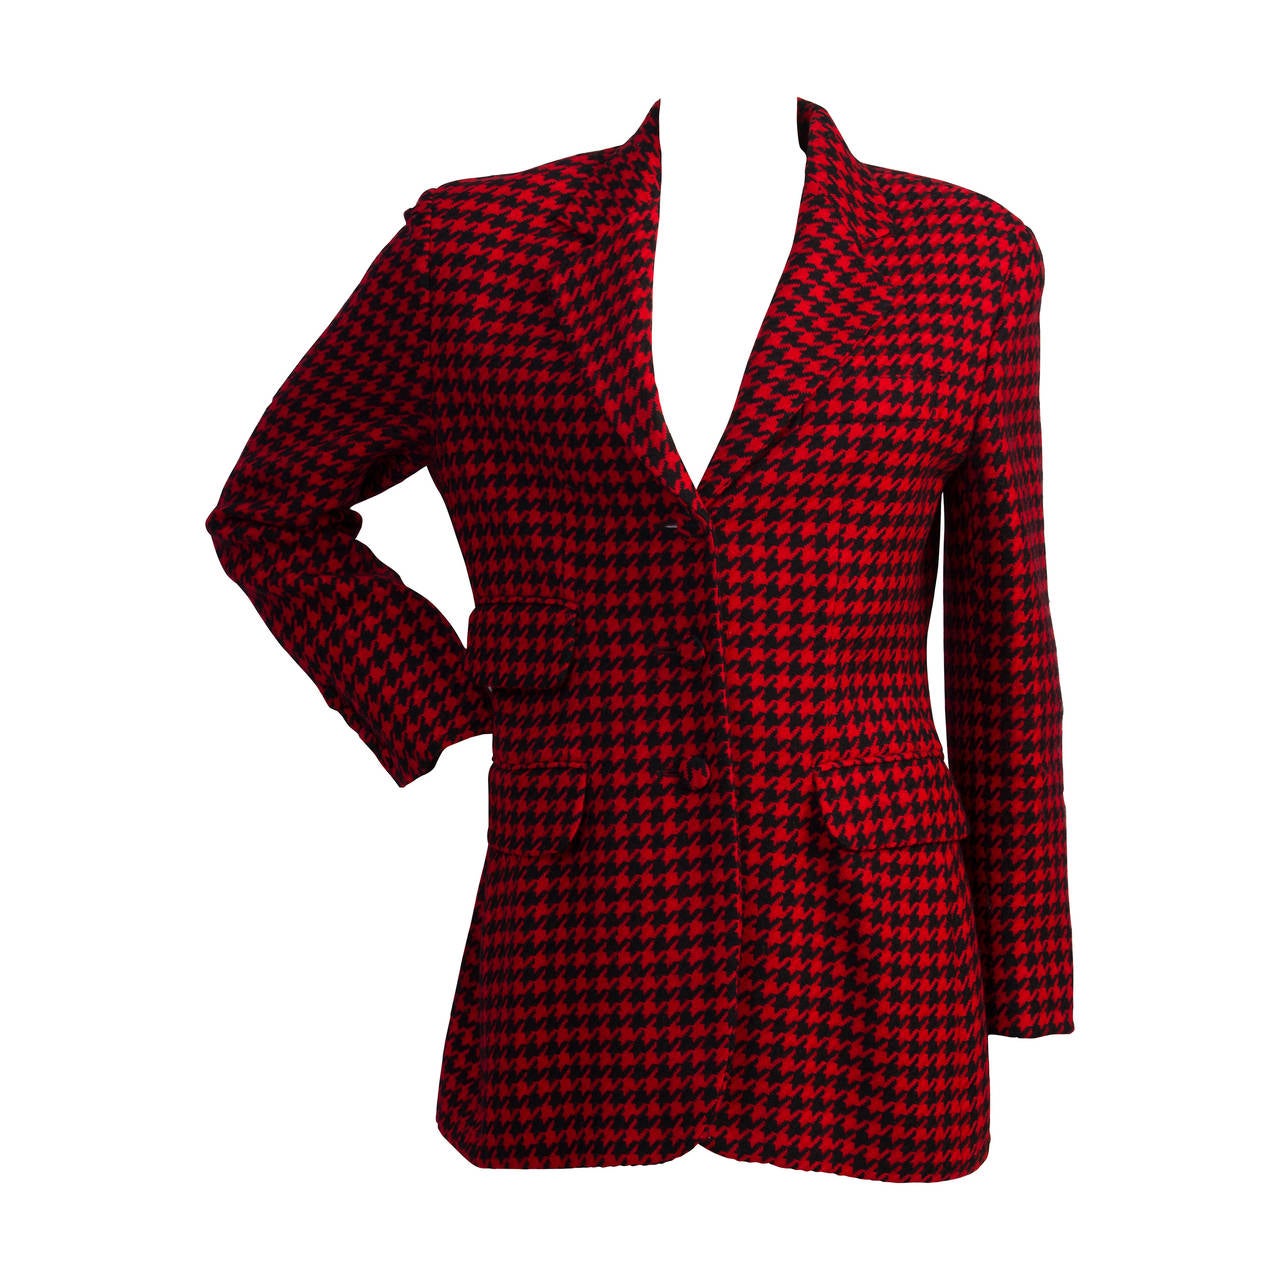 1980s Moschino Couture Pied de Poule red and black jacket For Sale